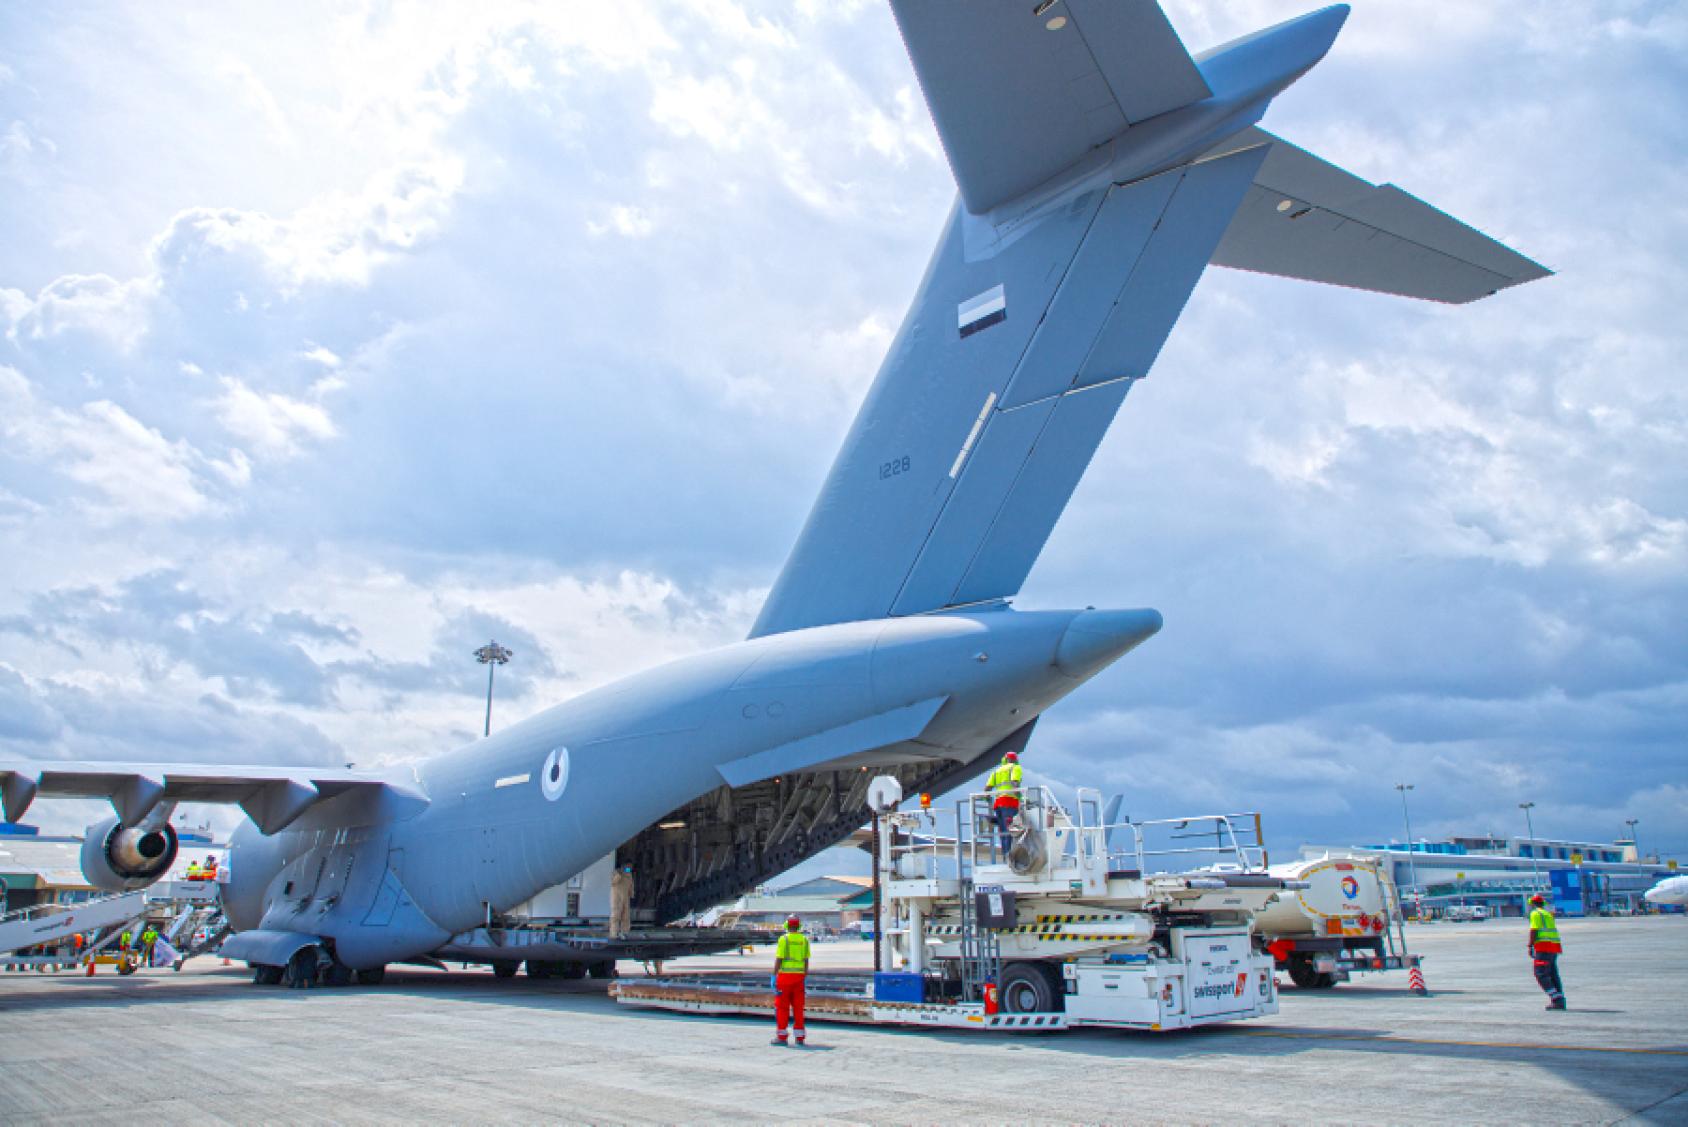 A cargo plane carrying final parts of the UN field hospital in Accra.